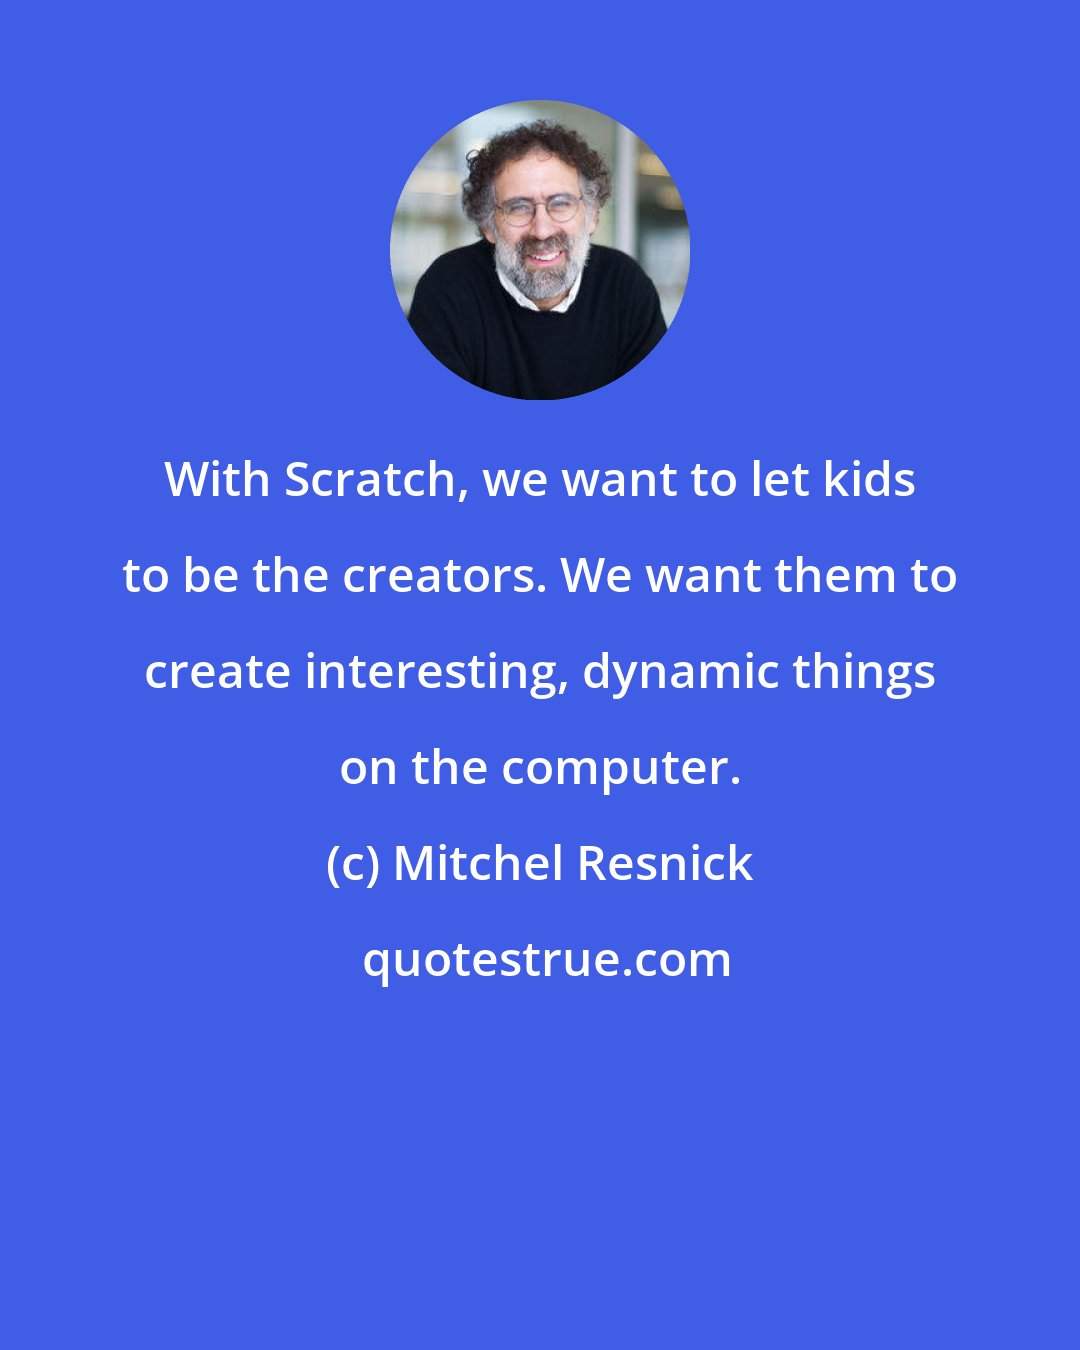 Mitchel Resnick: With Scratch, we want to let kids to be the creators. We want them to create interesting, dynamic things on the computer.